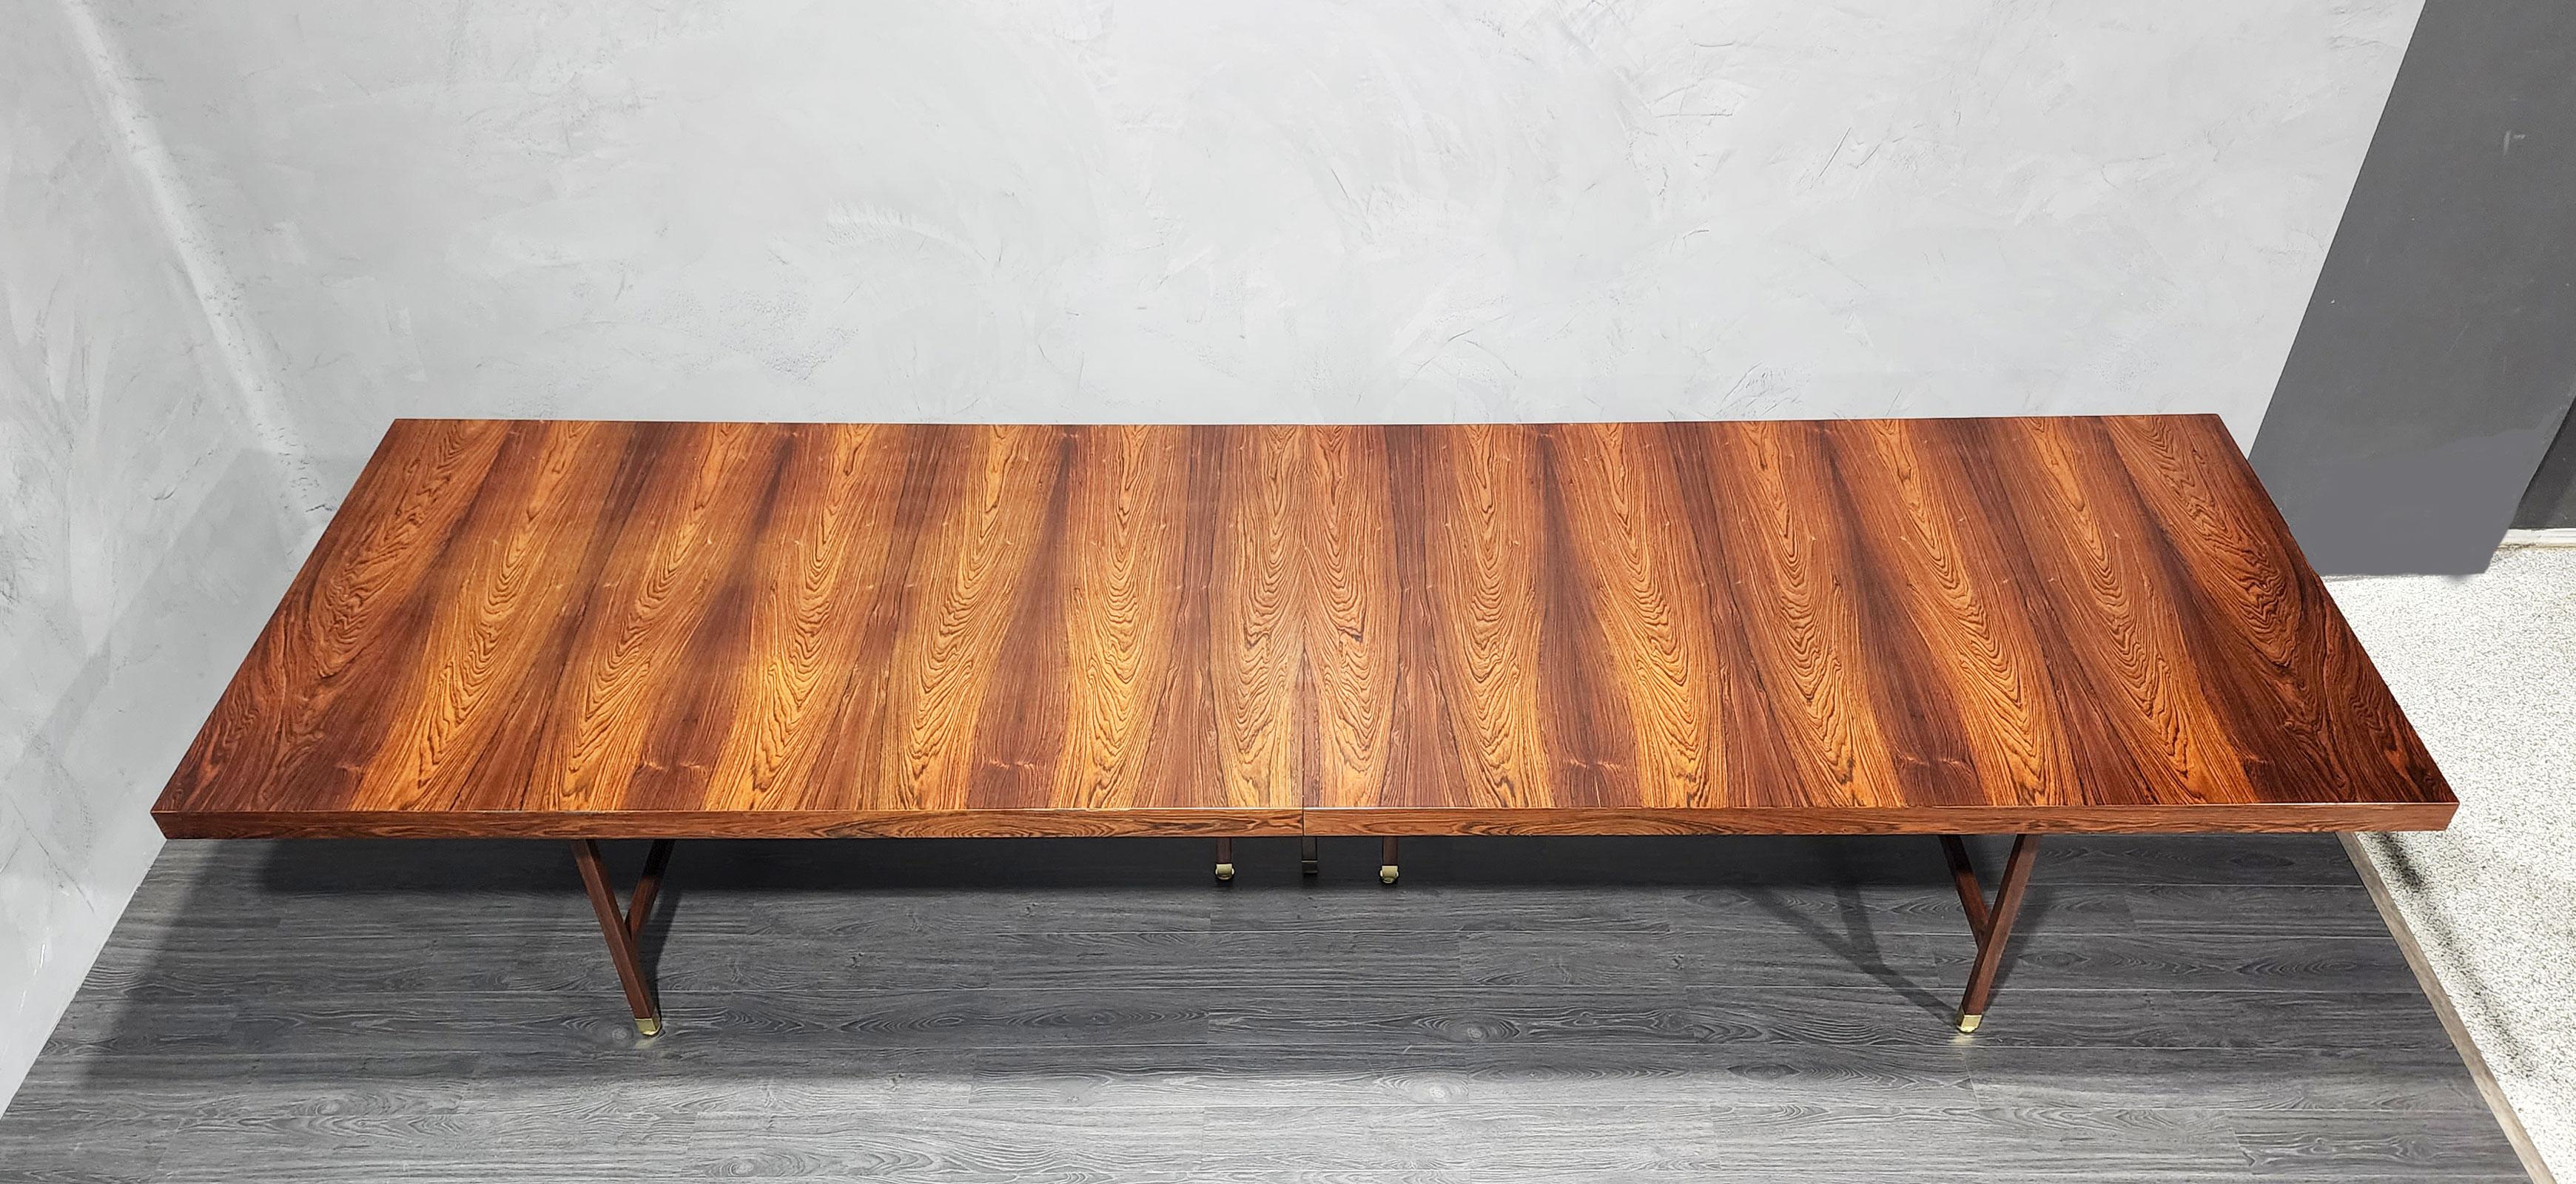 We are sure this was a custom order as they just did not make this table in the size unless specified. It is beautiful dramatic Brazilian rosewood. We have fully restored. Brass caps on legs and mahogany legs. There is one leaf with a support leg.